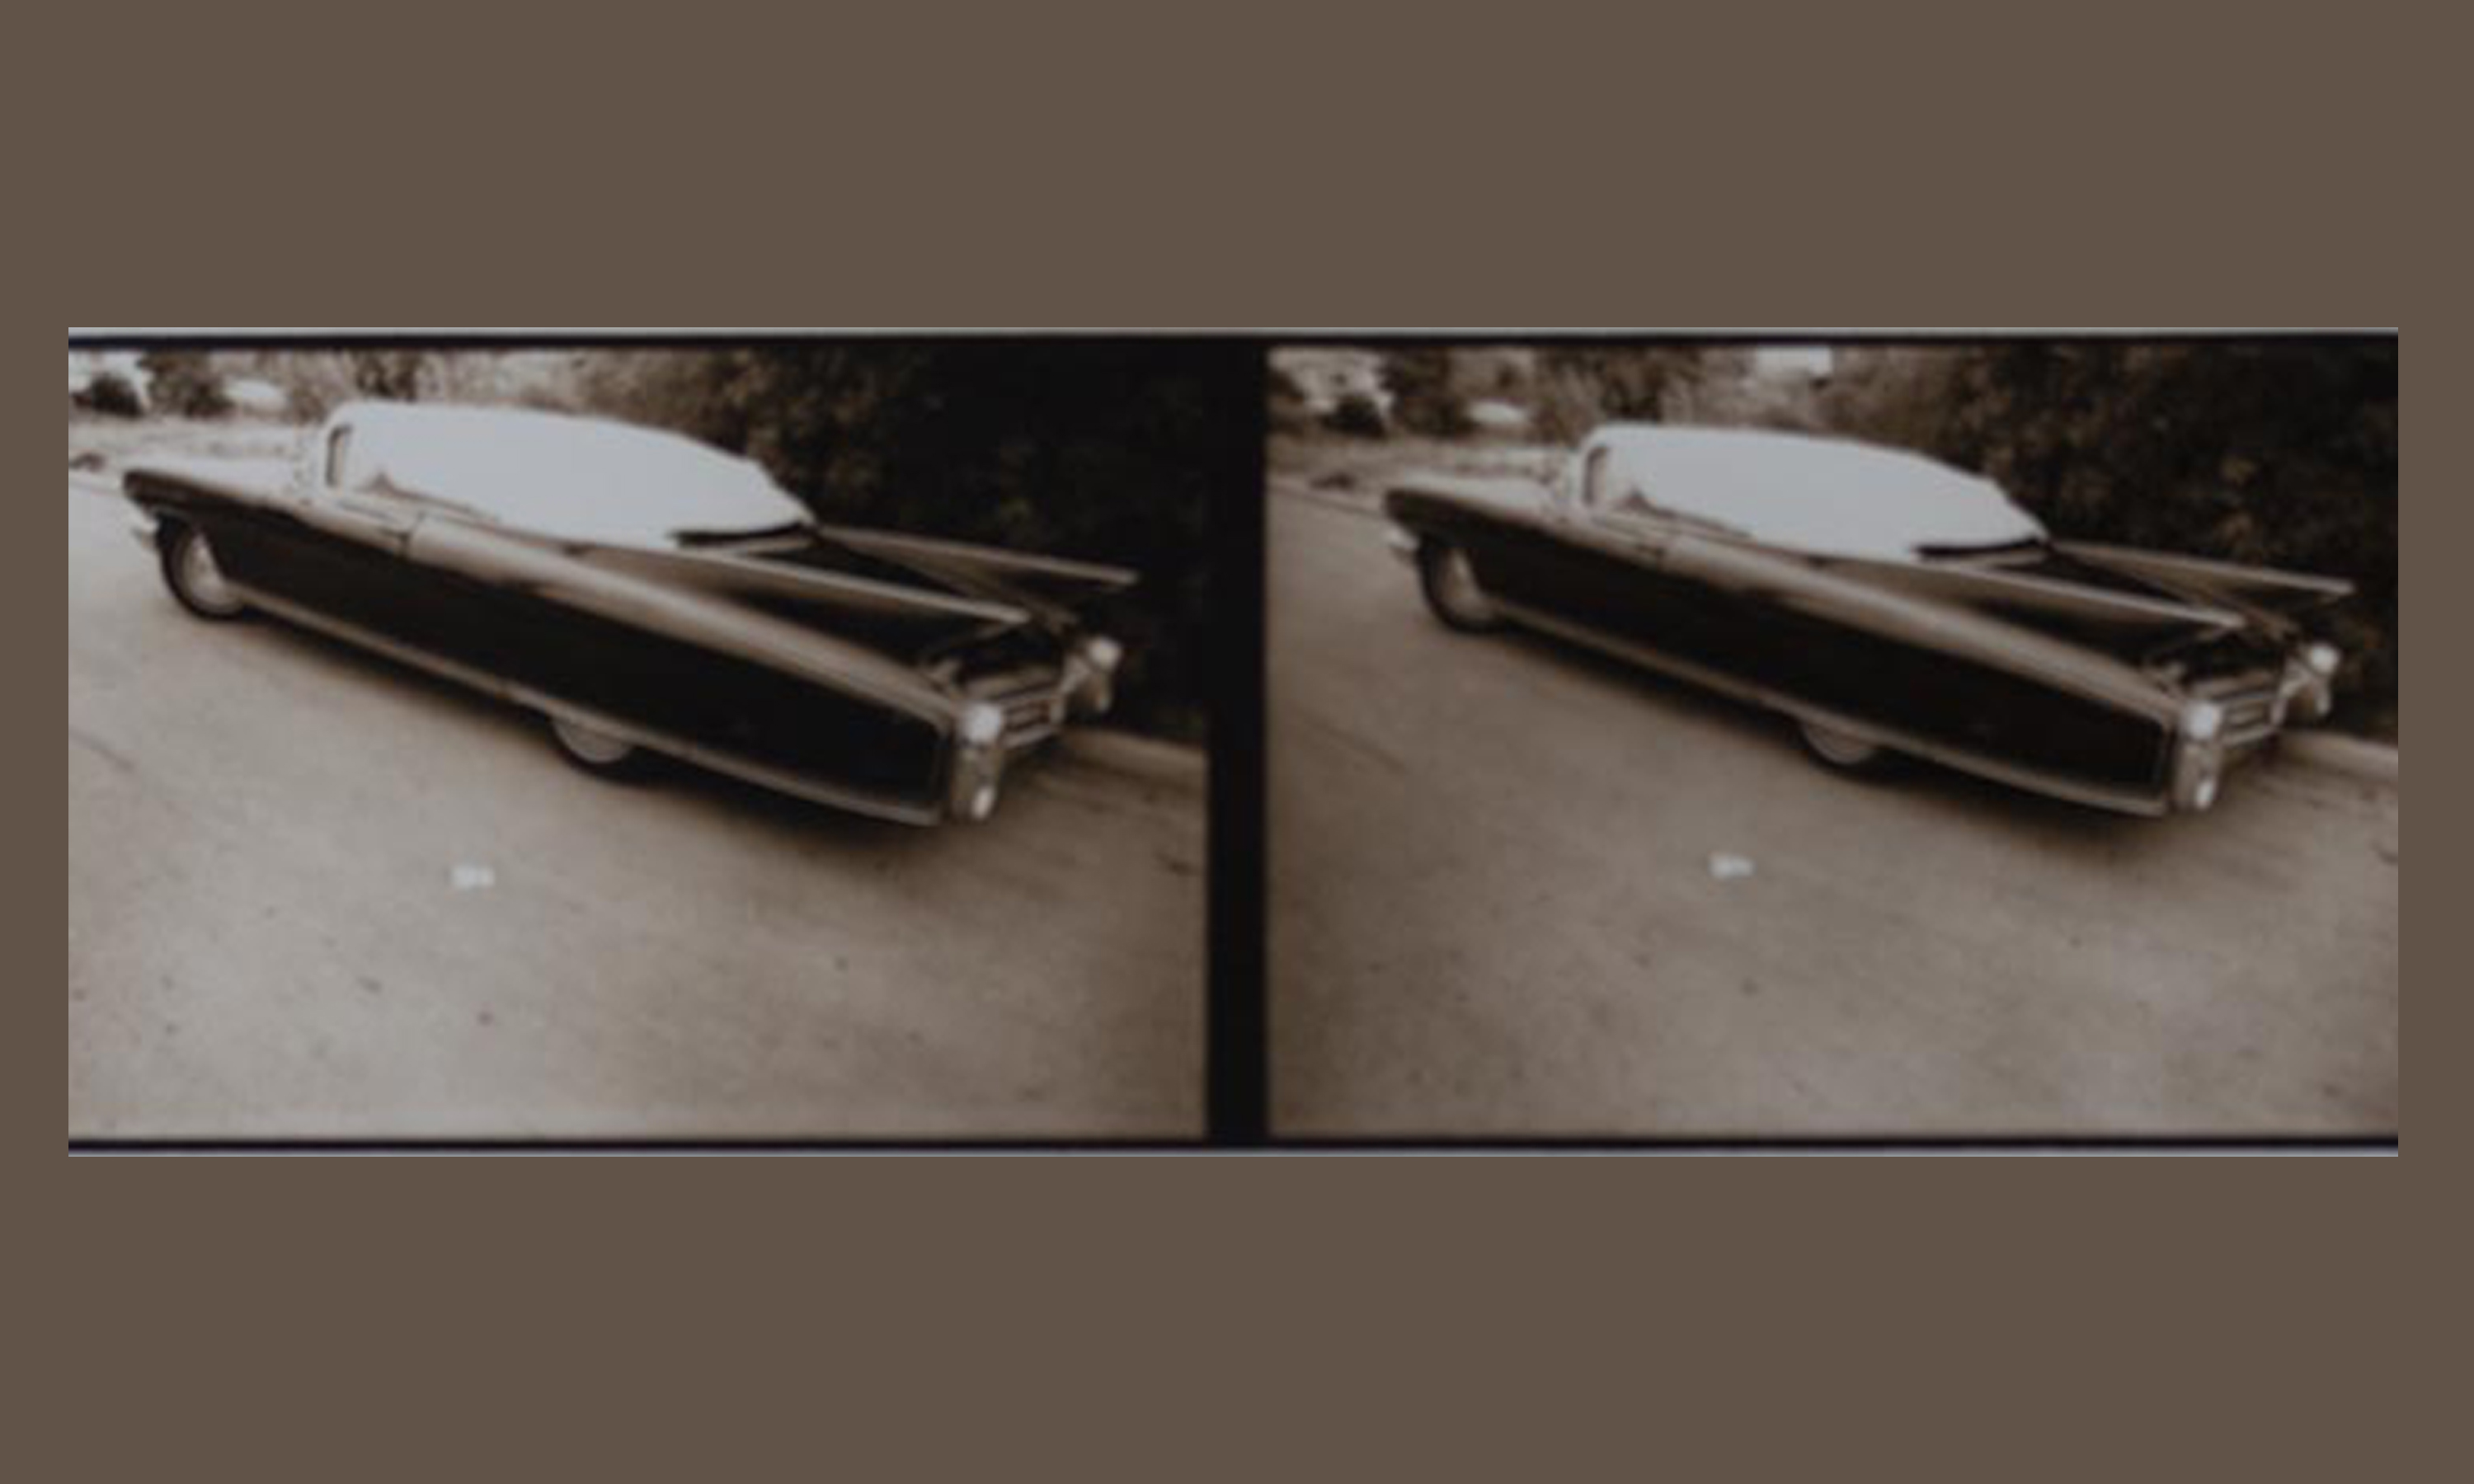 Two photographs of the same car.